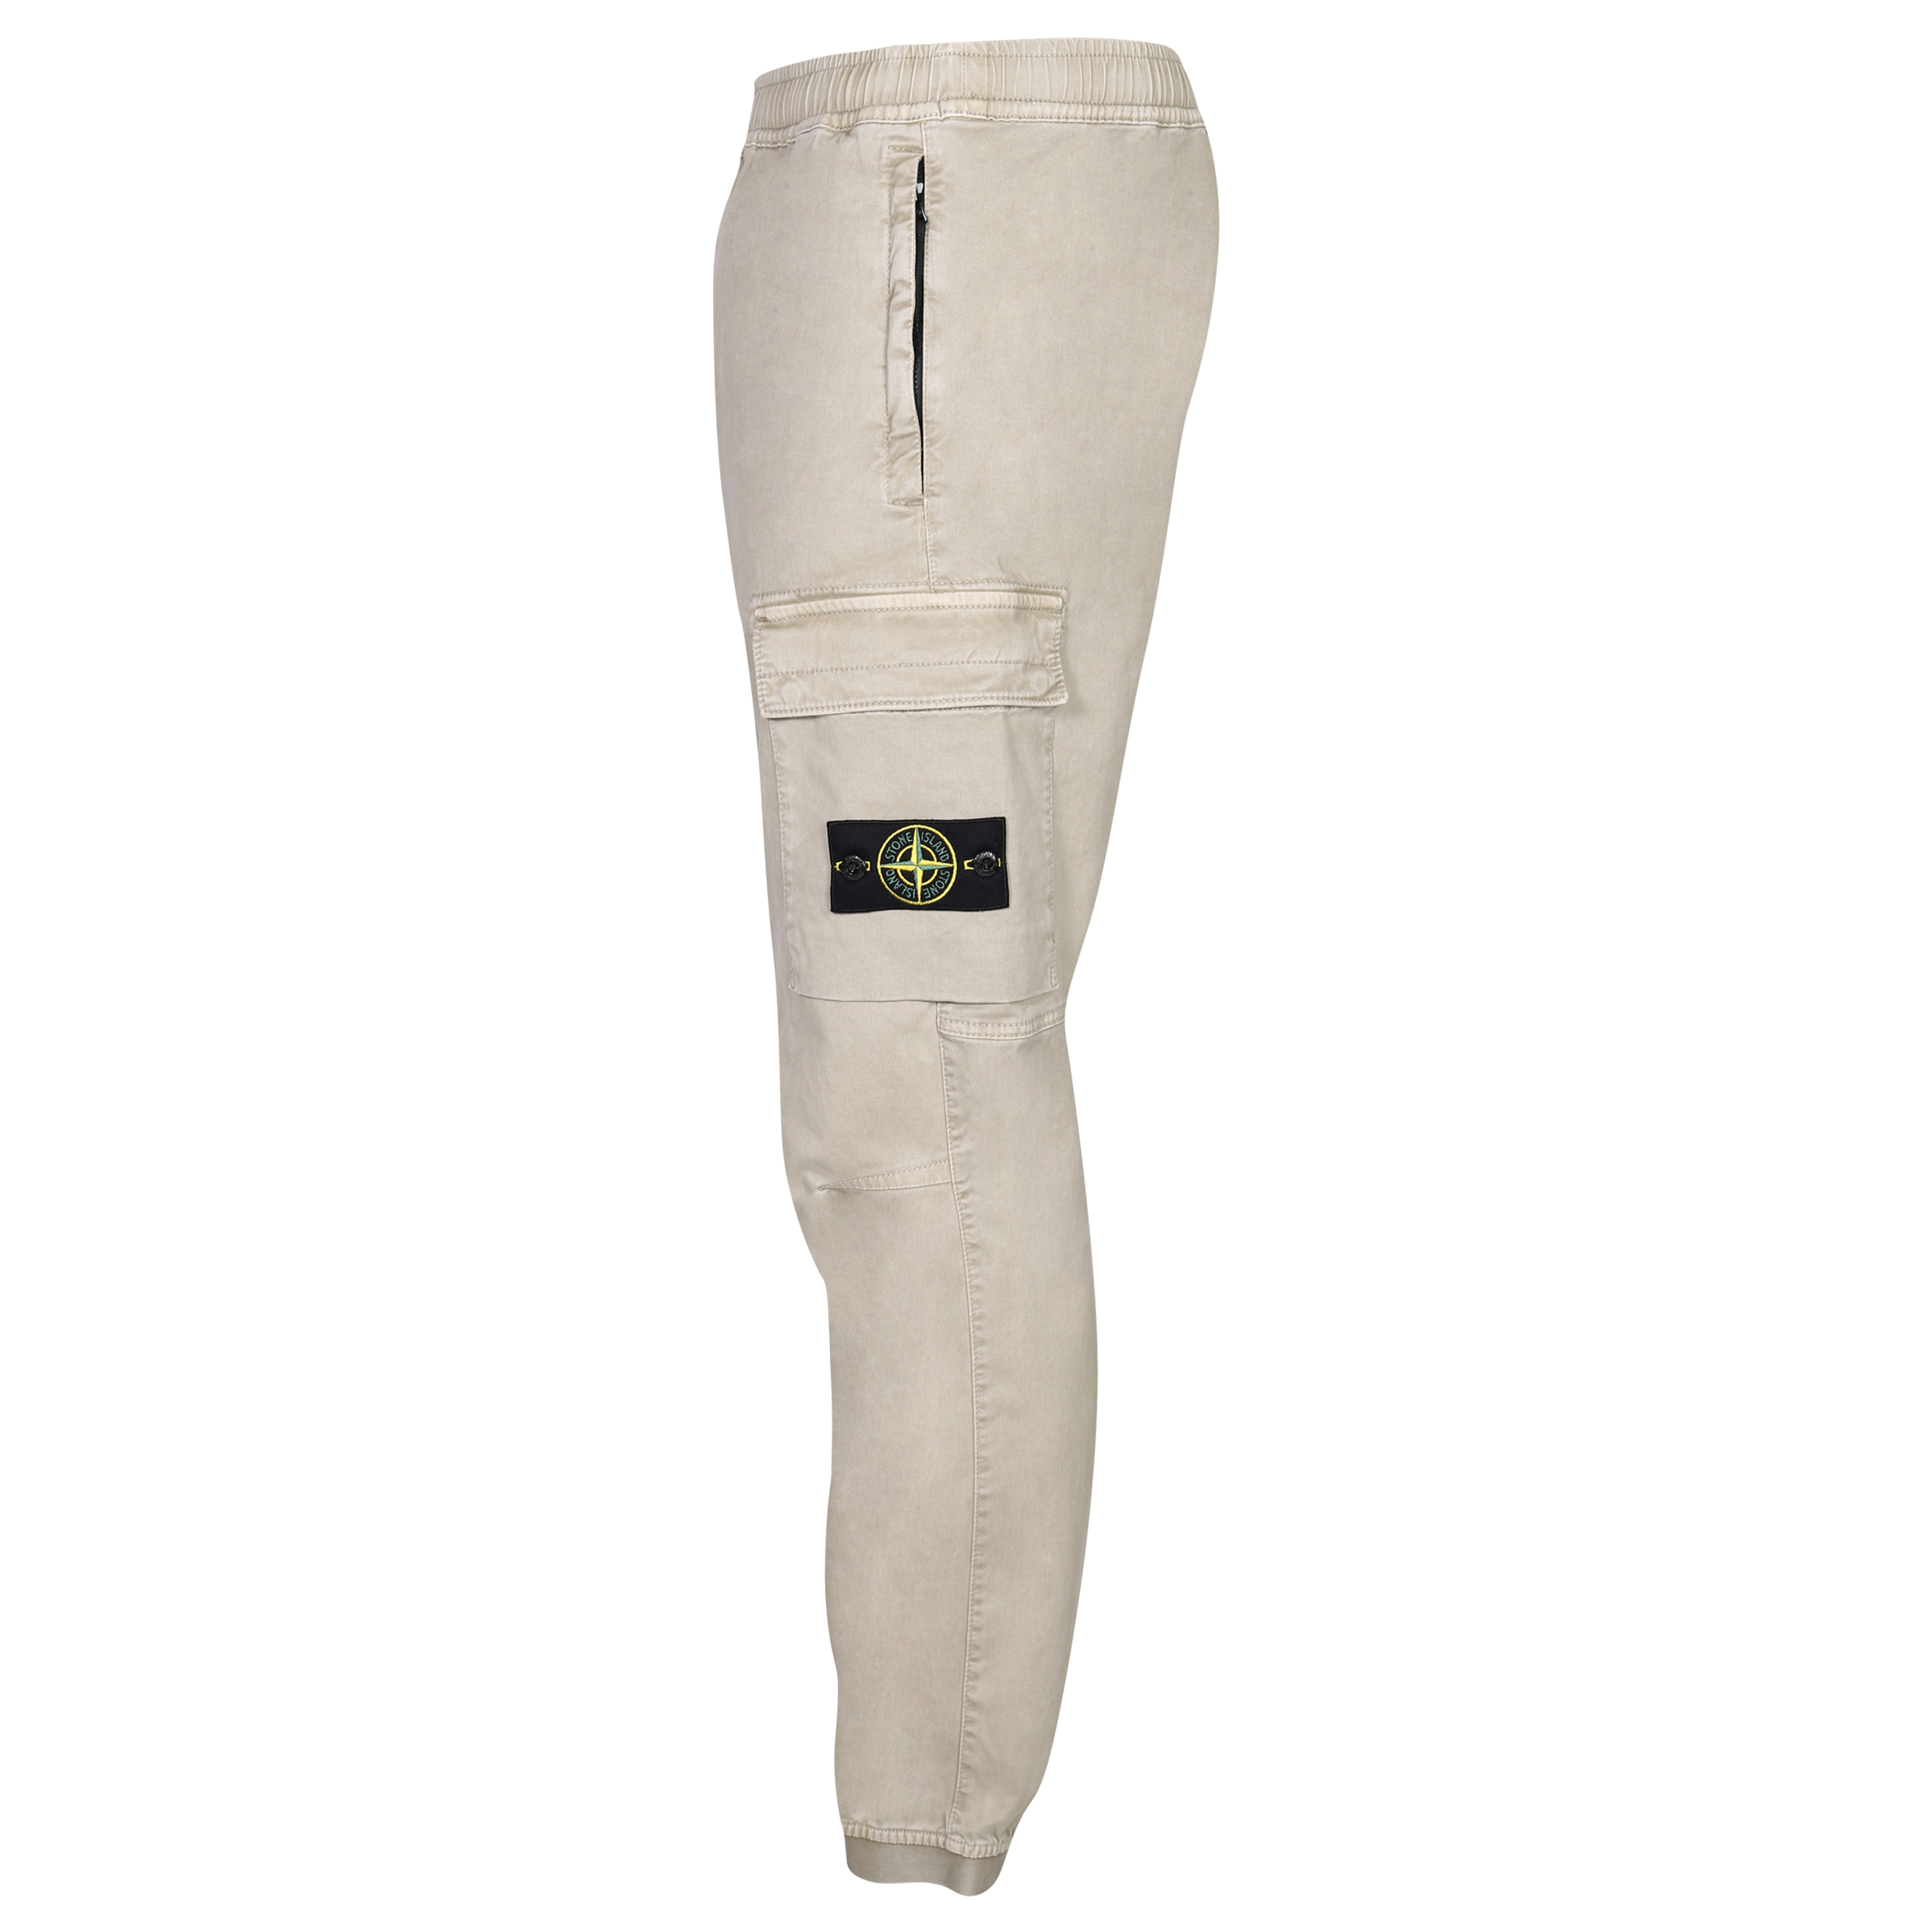 Stone Island Cargo Pant in Washed Beige 29